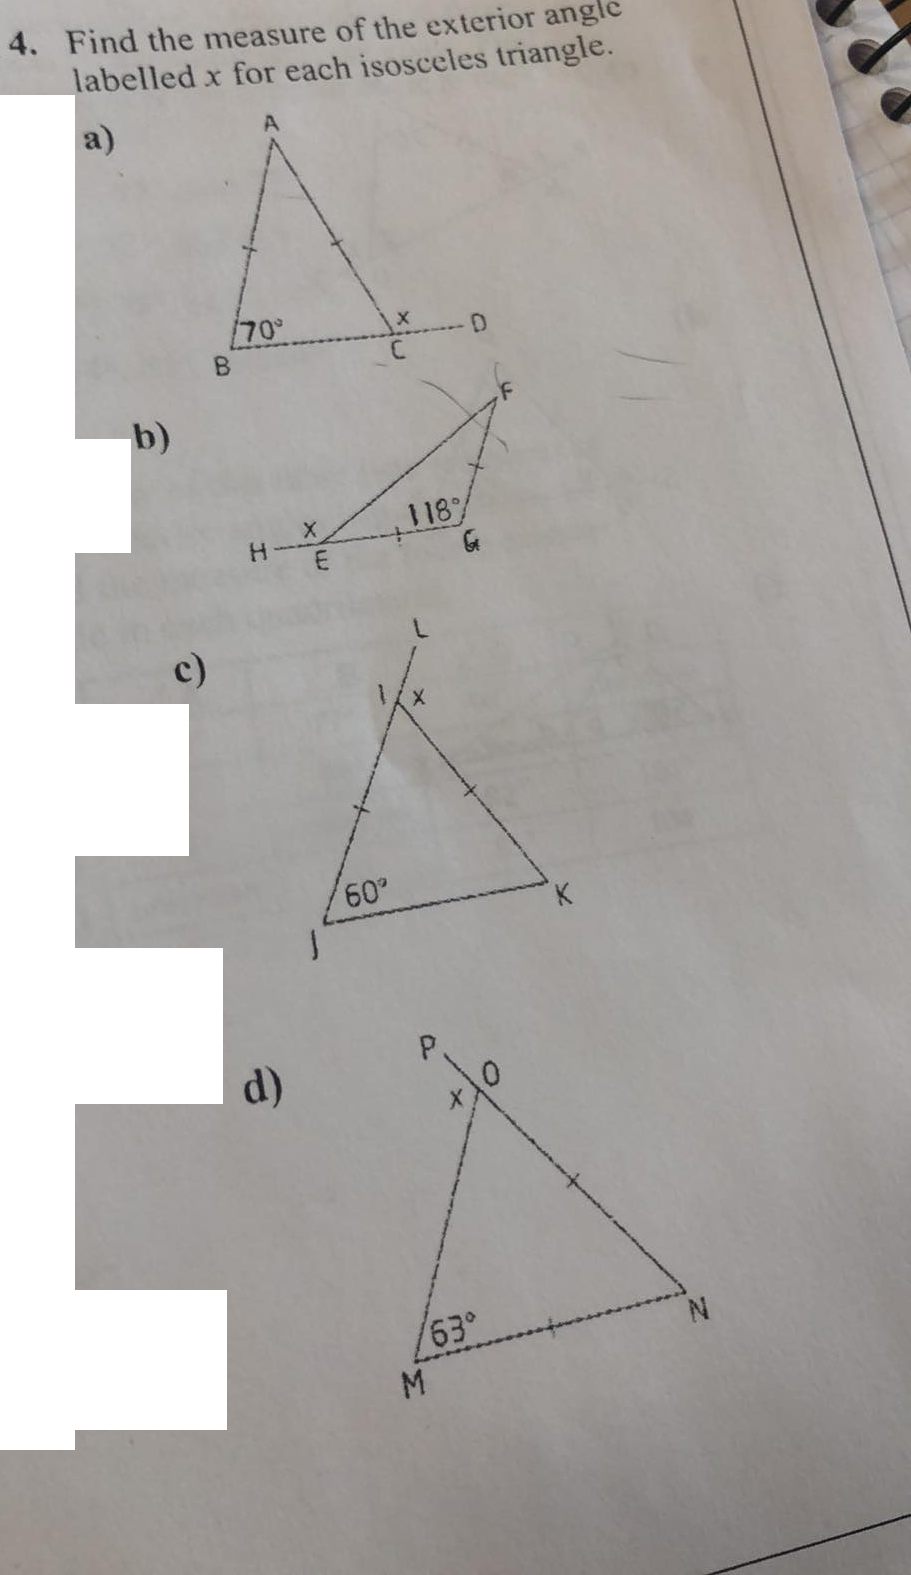 4. Find the measure of the exterior angle
labelled x for each isosceles triangle.
a)
70°
b)
118
c)
0,
d)
63°
M.
B.
